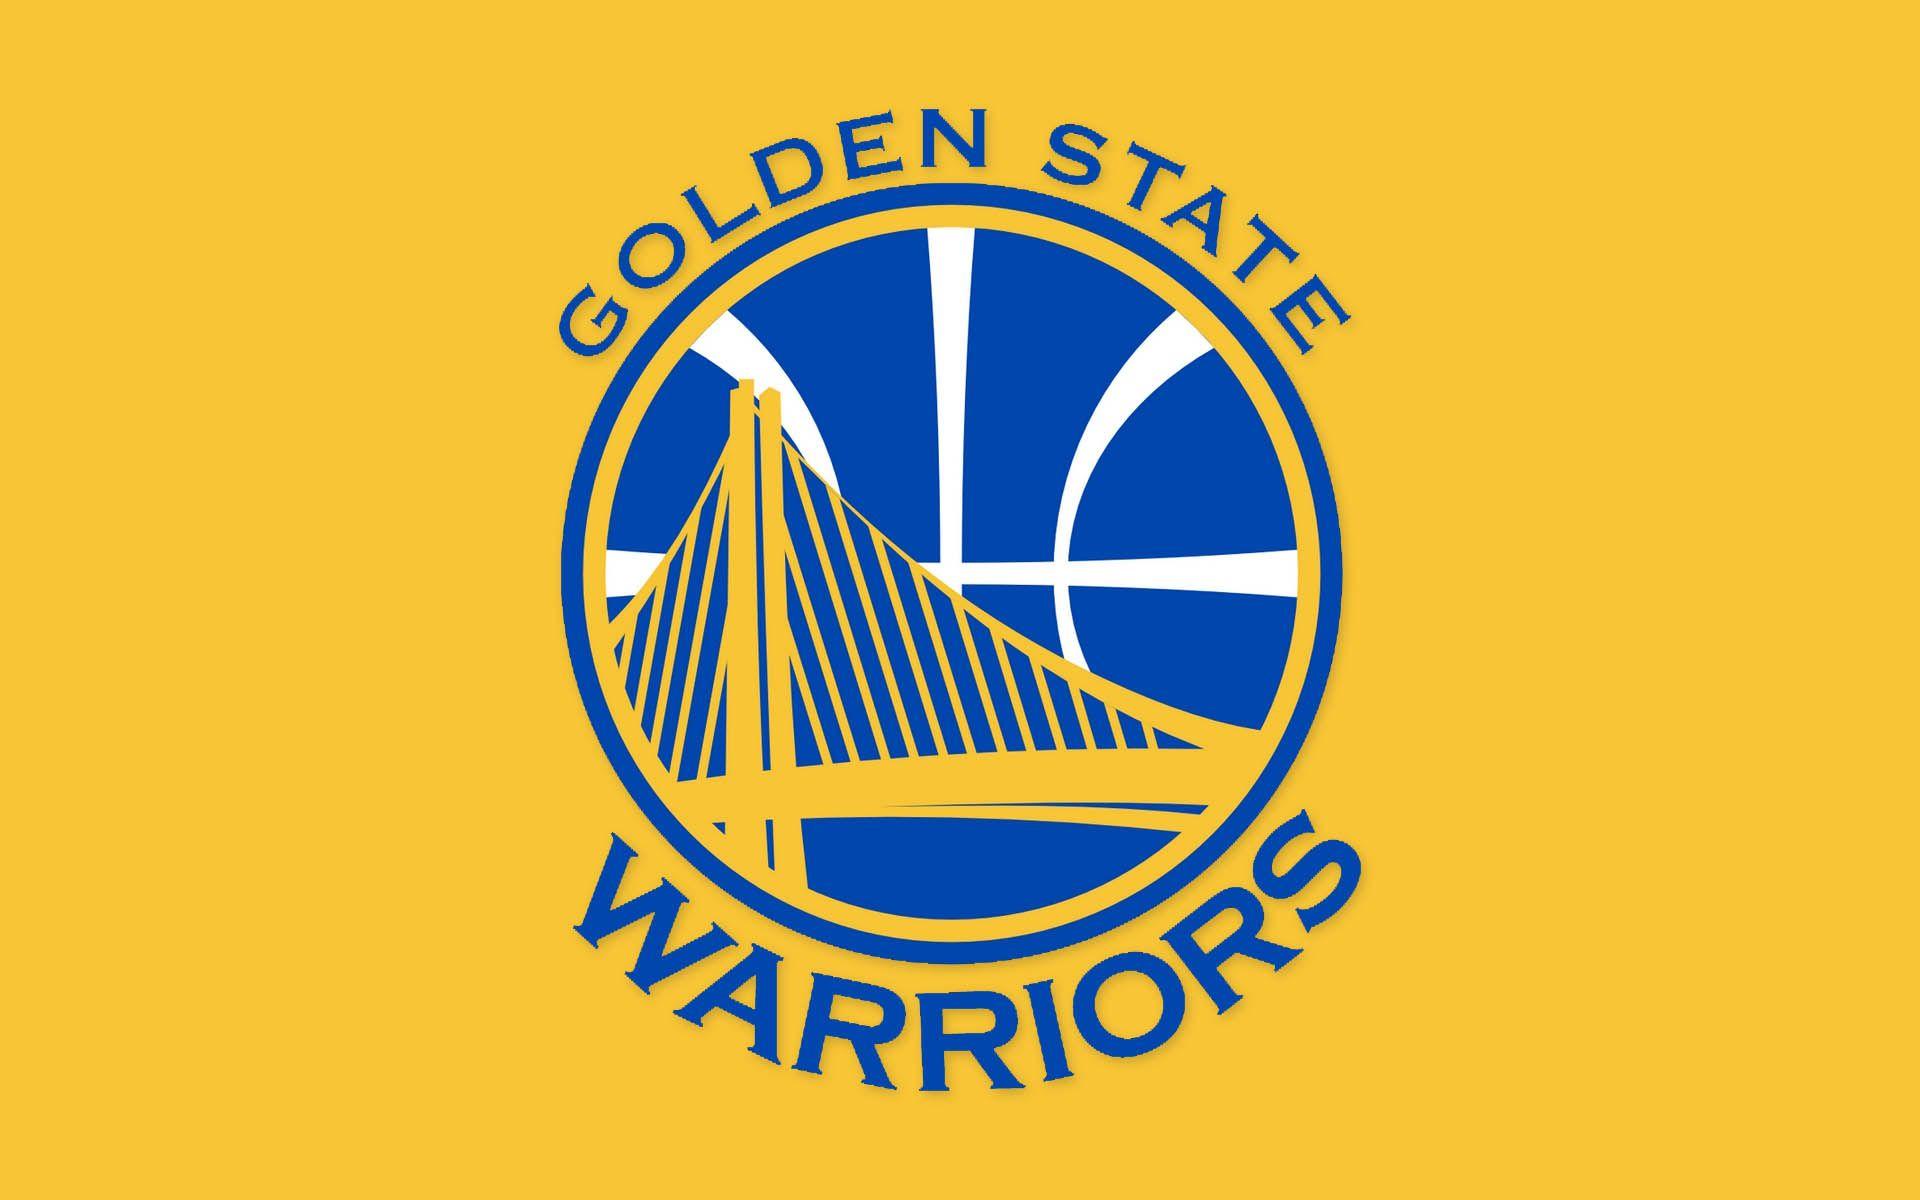 Download Free 20 Golden State Warriors Wallpaper. Stephen Curry